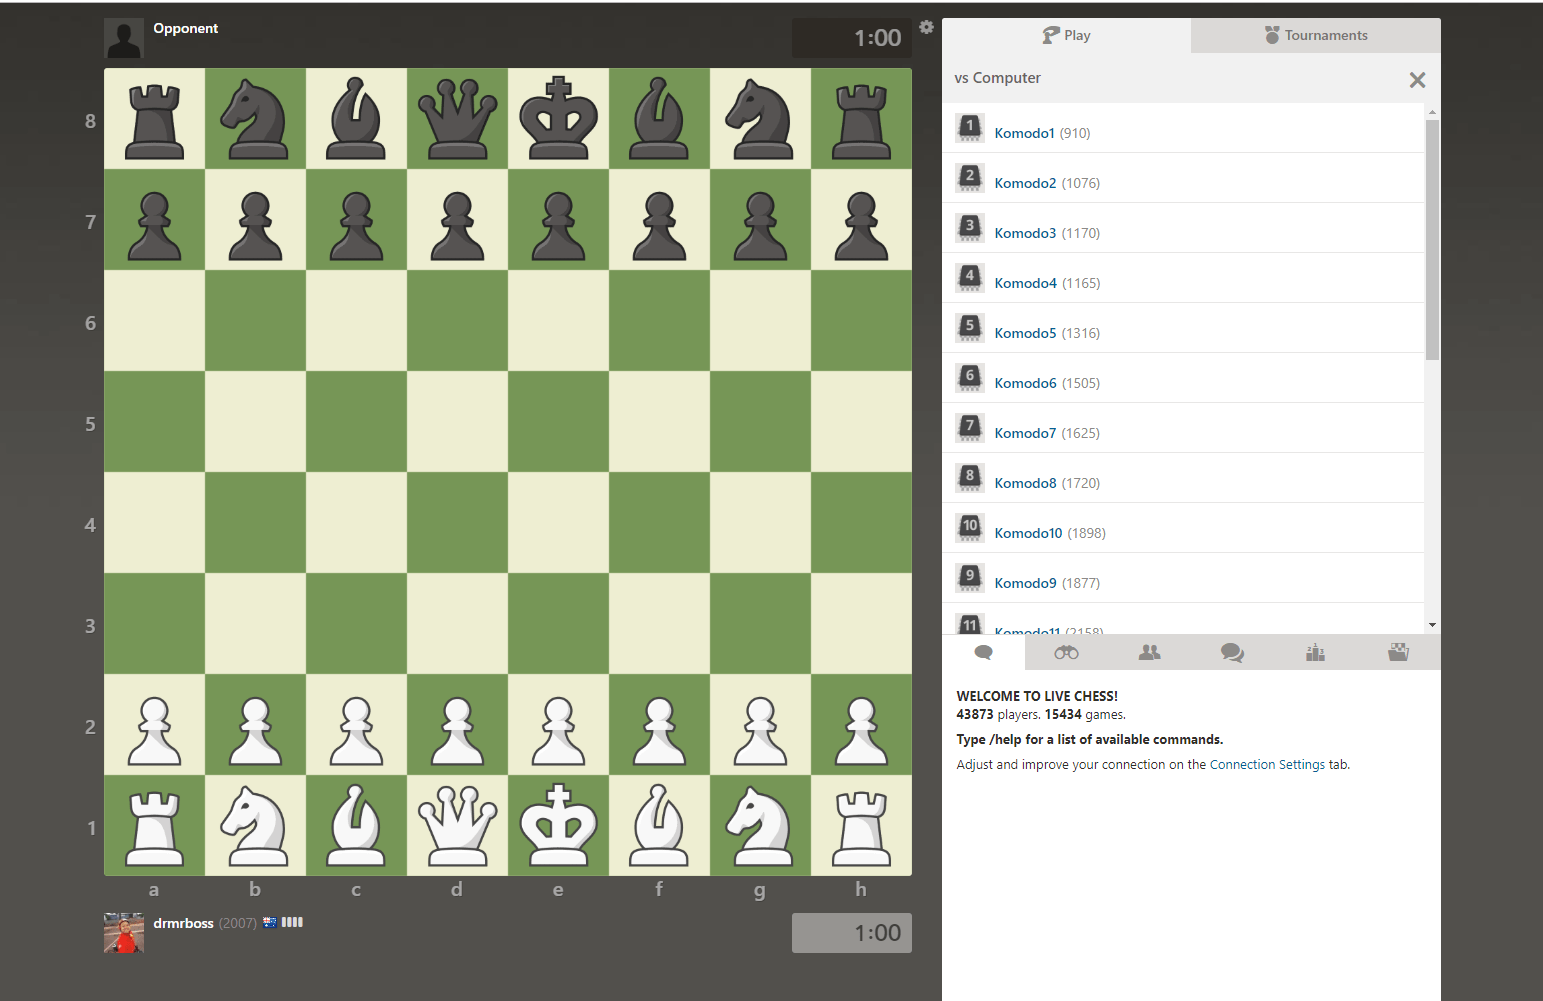 Playing chess against computer level 1. Game1 